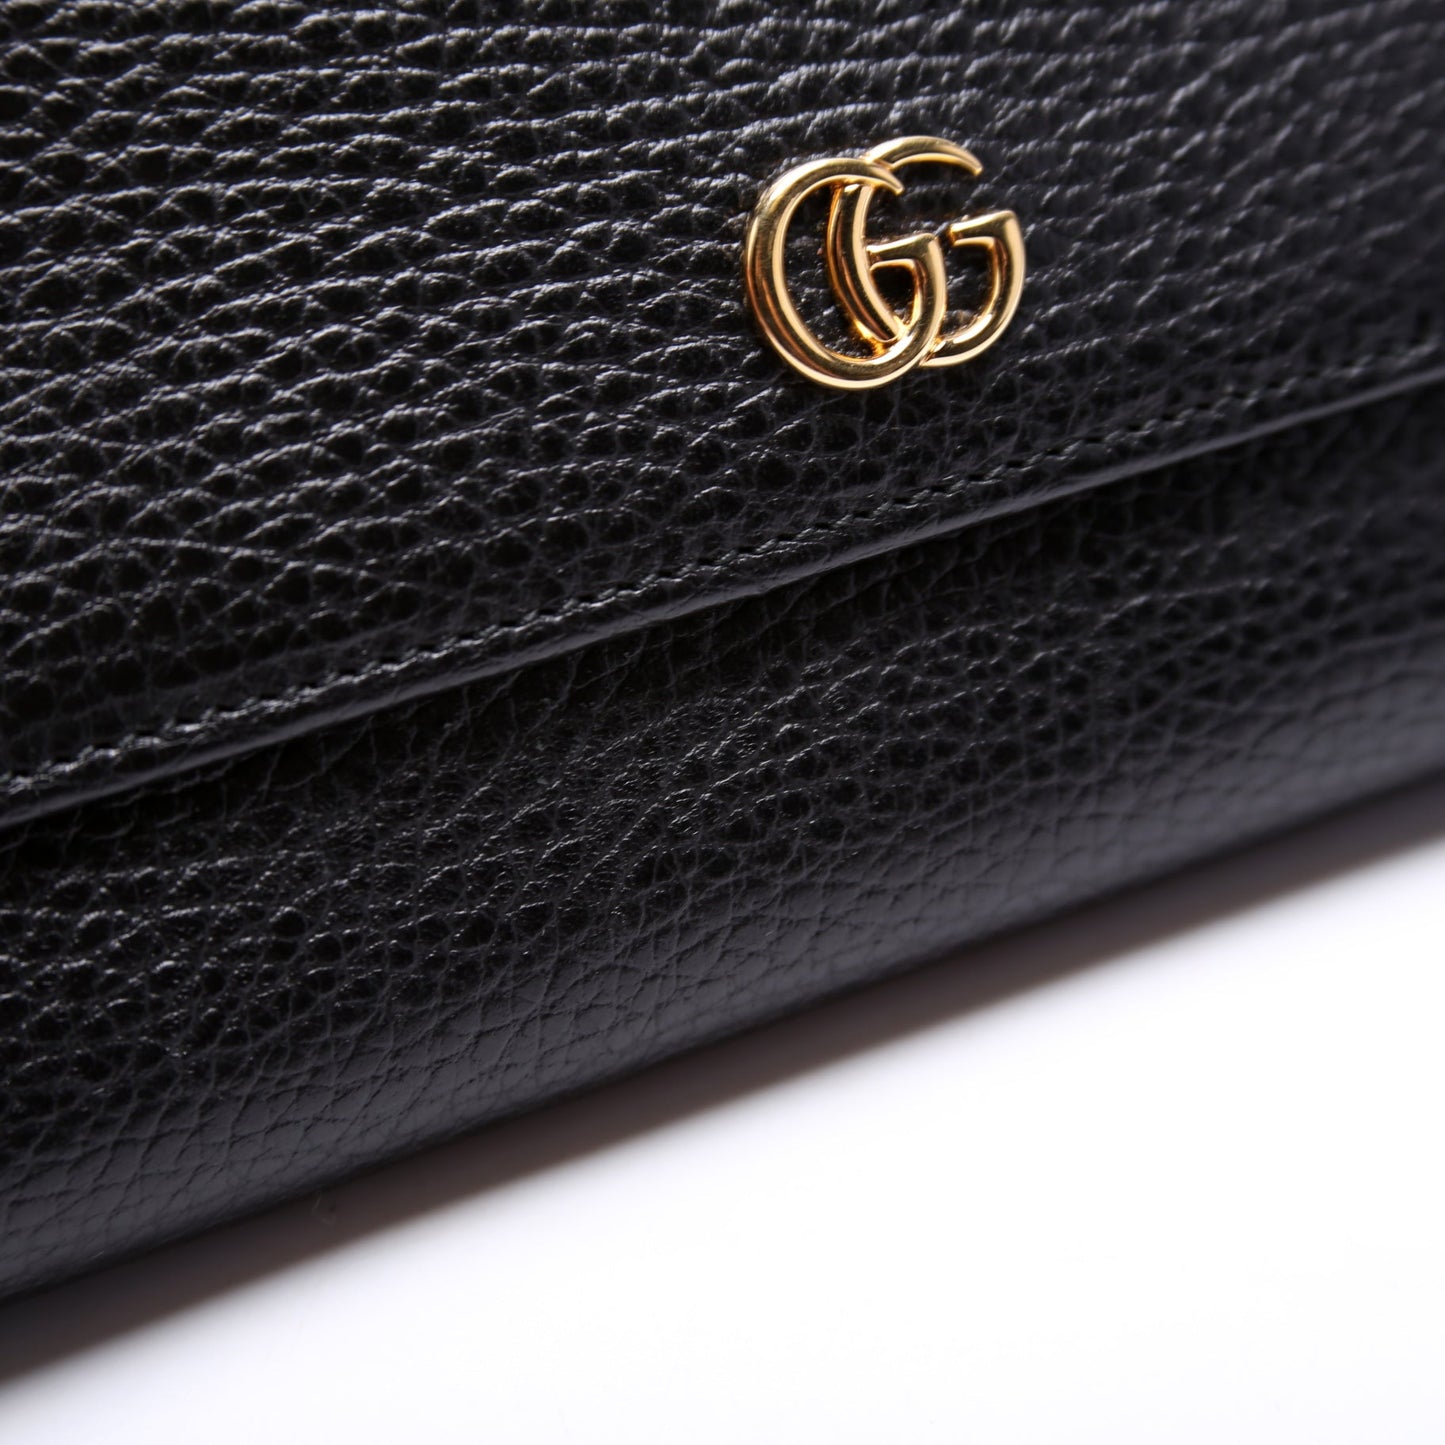 456116 Gucci Marmont Wallet